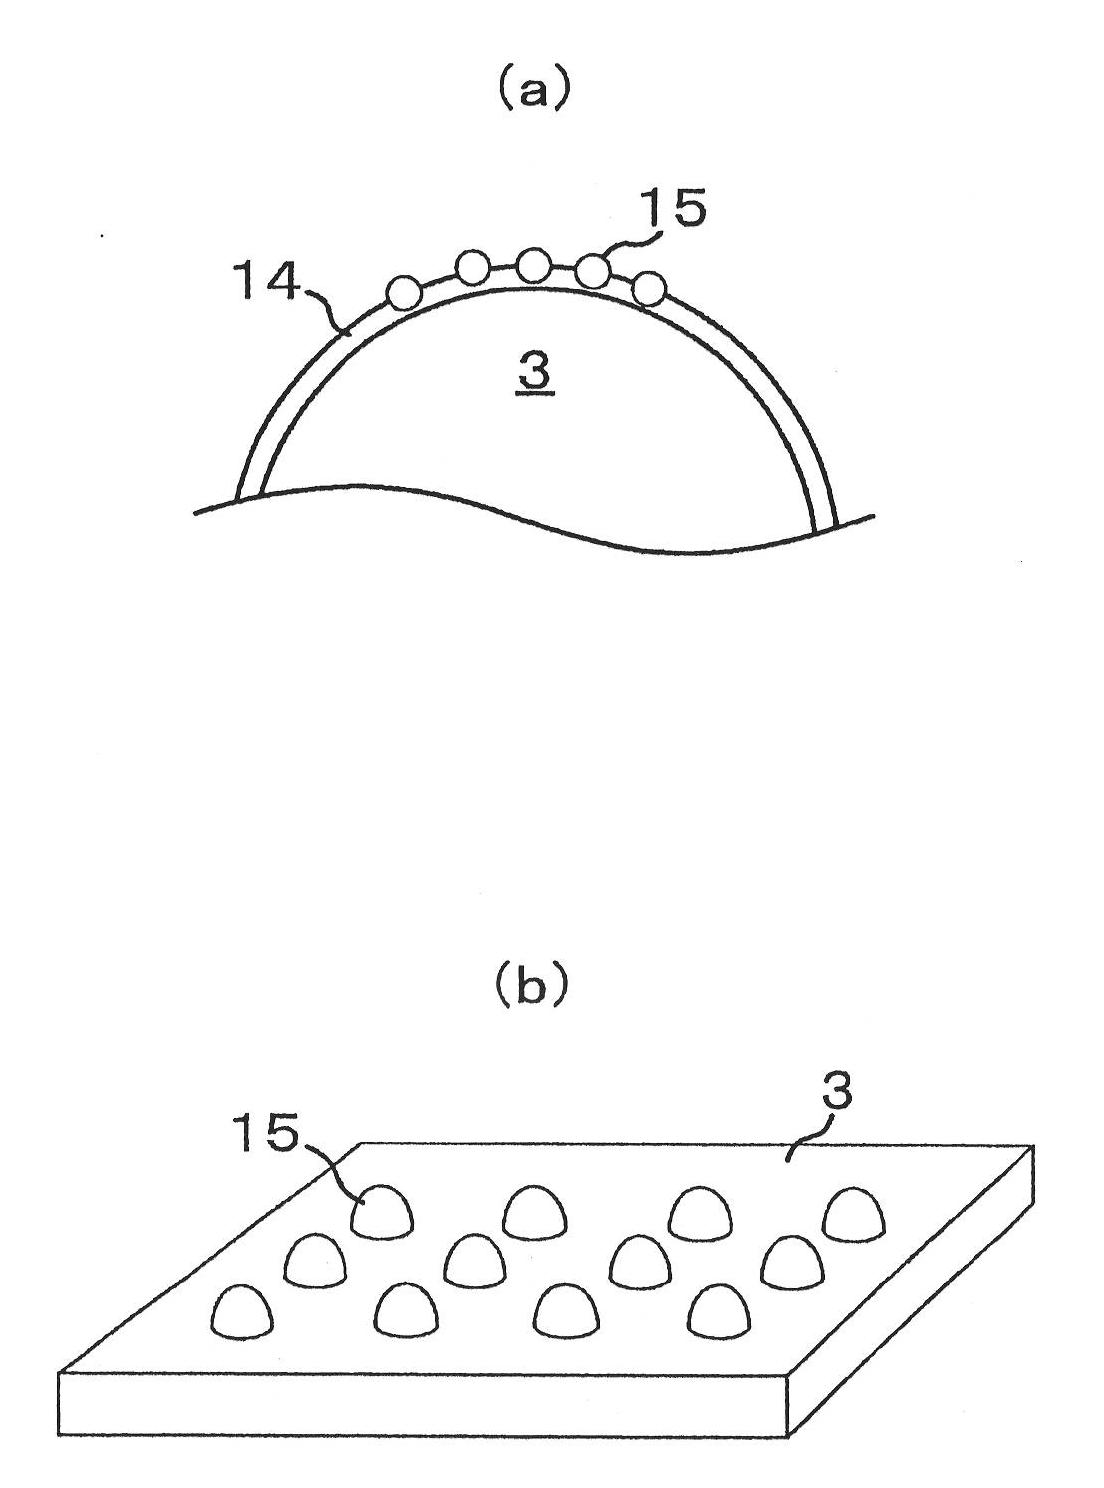 Carbon nano-tube manufacturing method and carbon nano-tube manufacturing apparatus